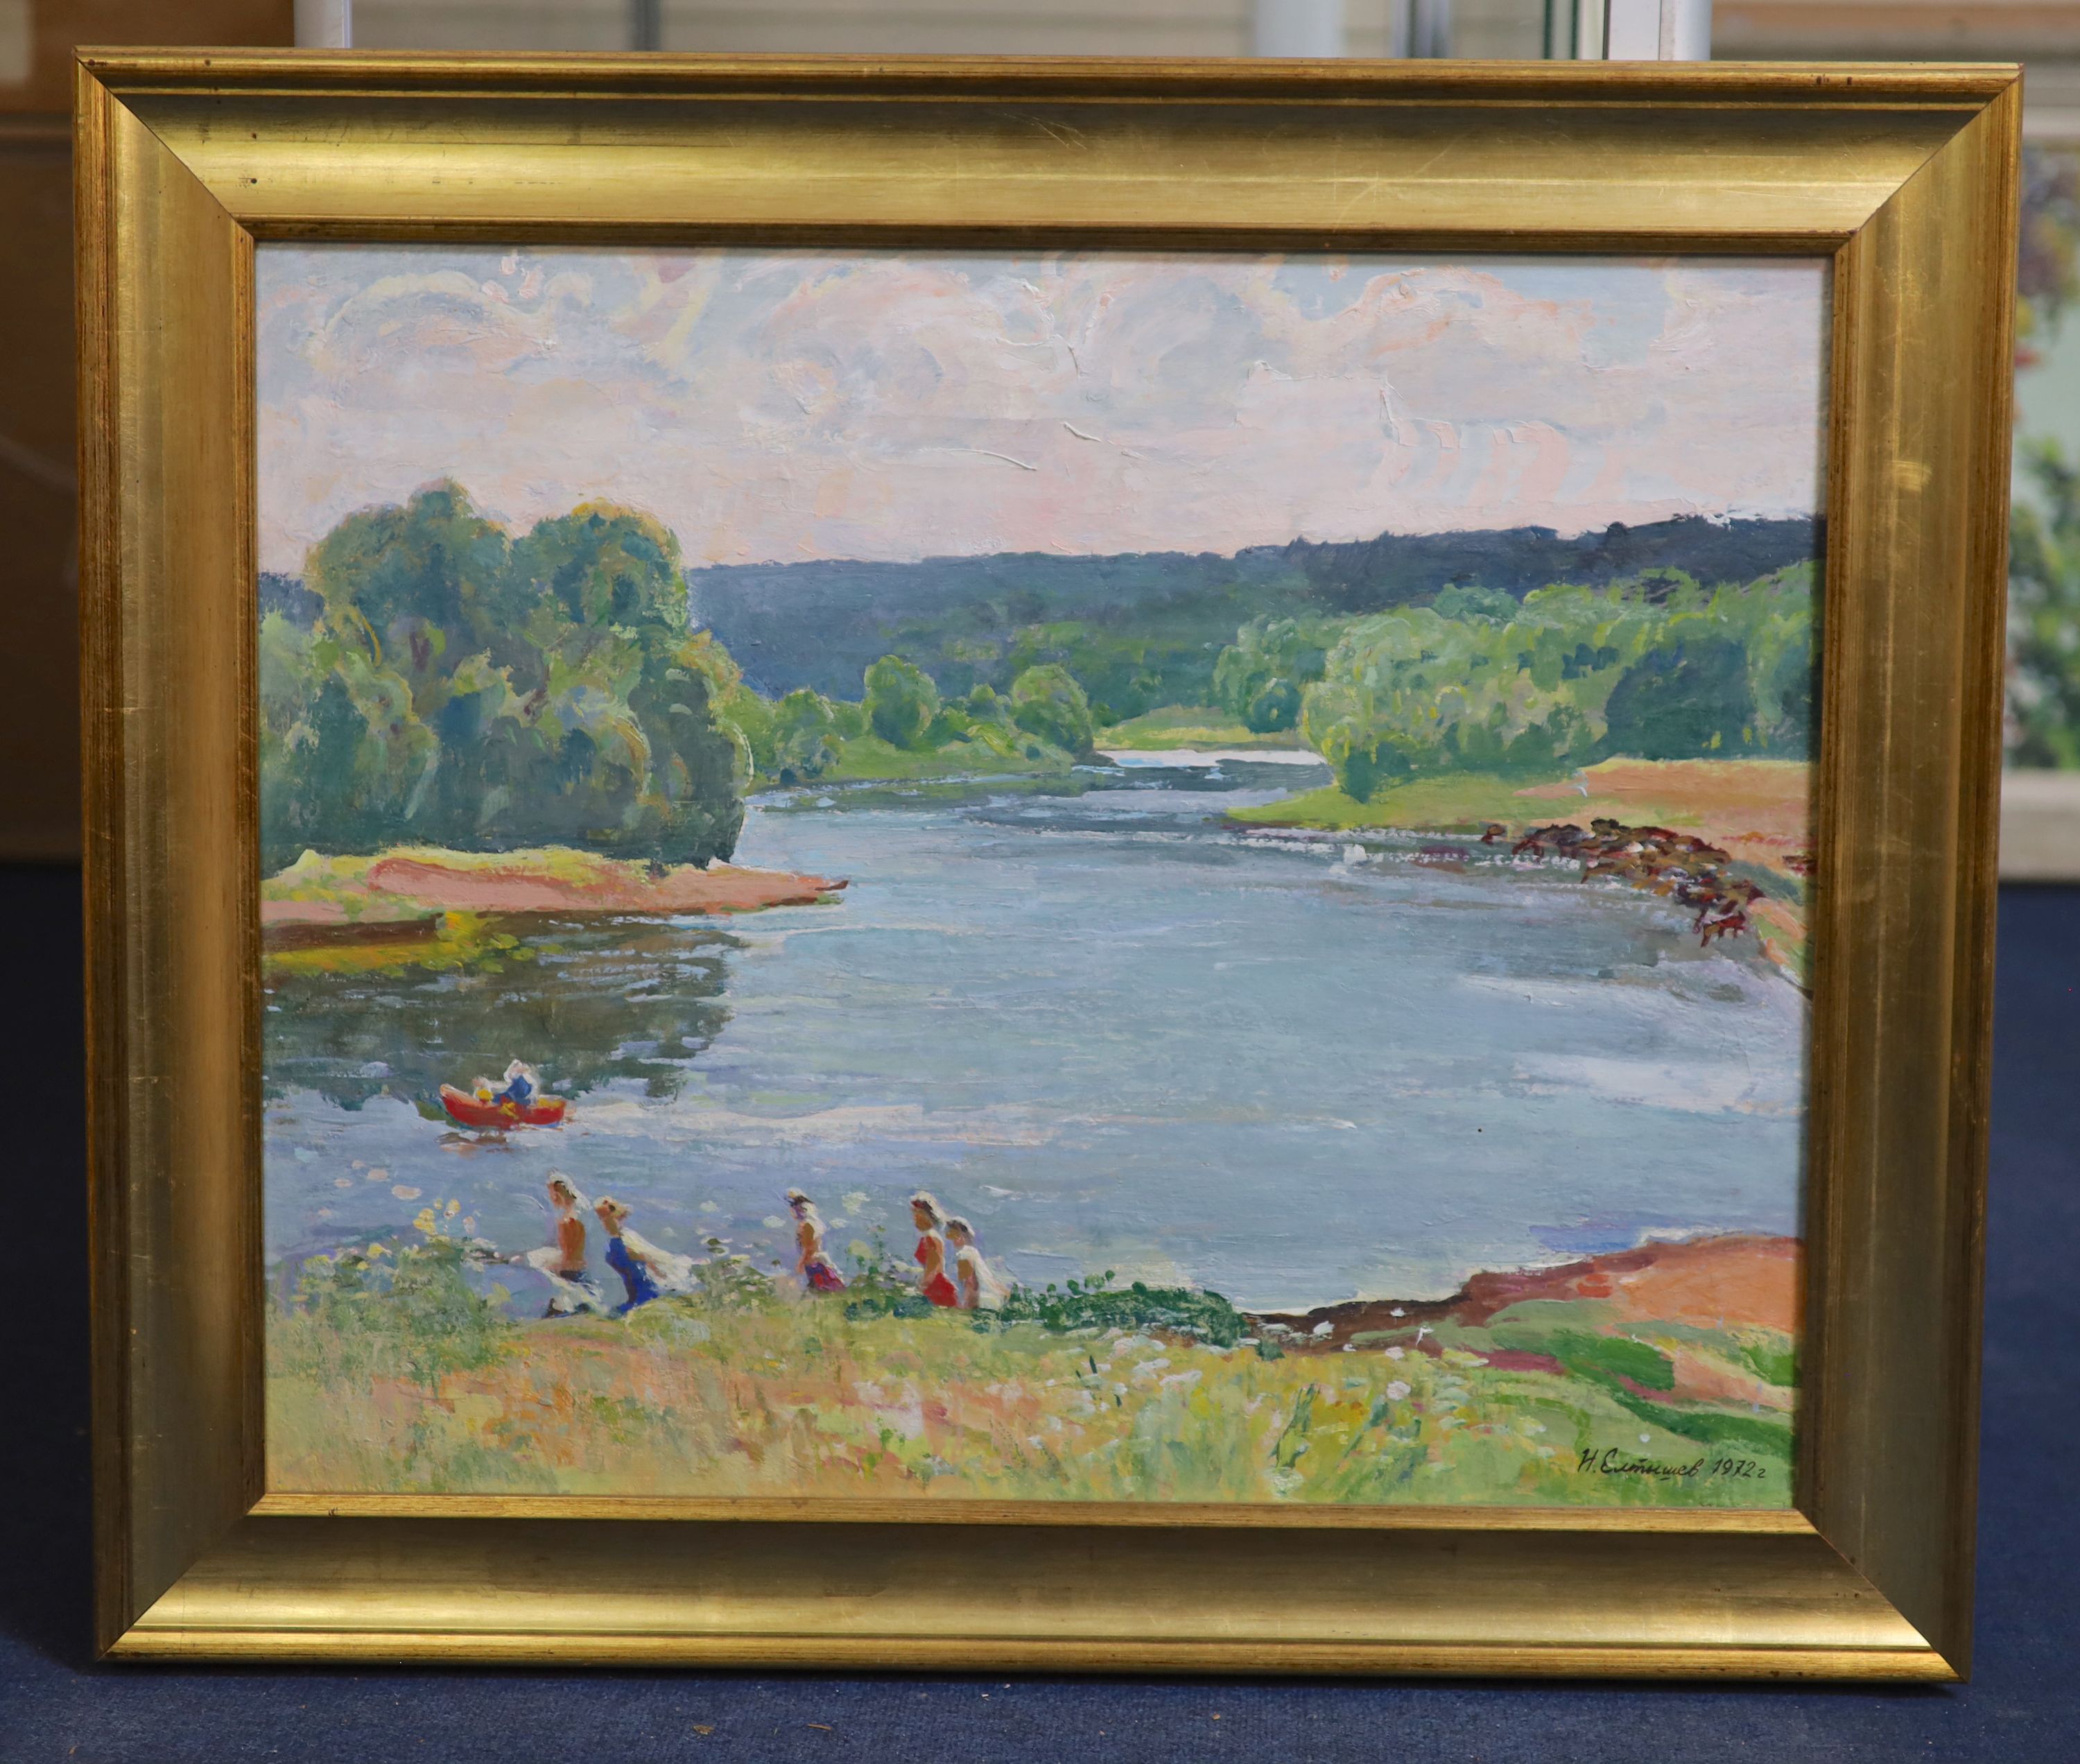 Nikolai Eltyshev (Russian), oil on canvas, Fun by the river, signed and dated 1972, 54 x 67cm